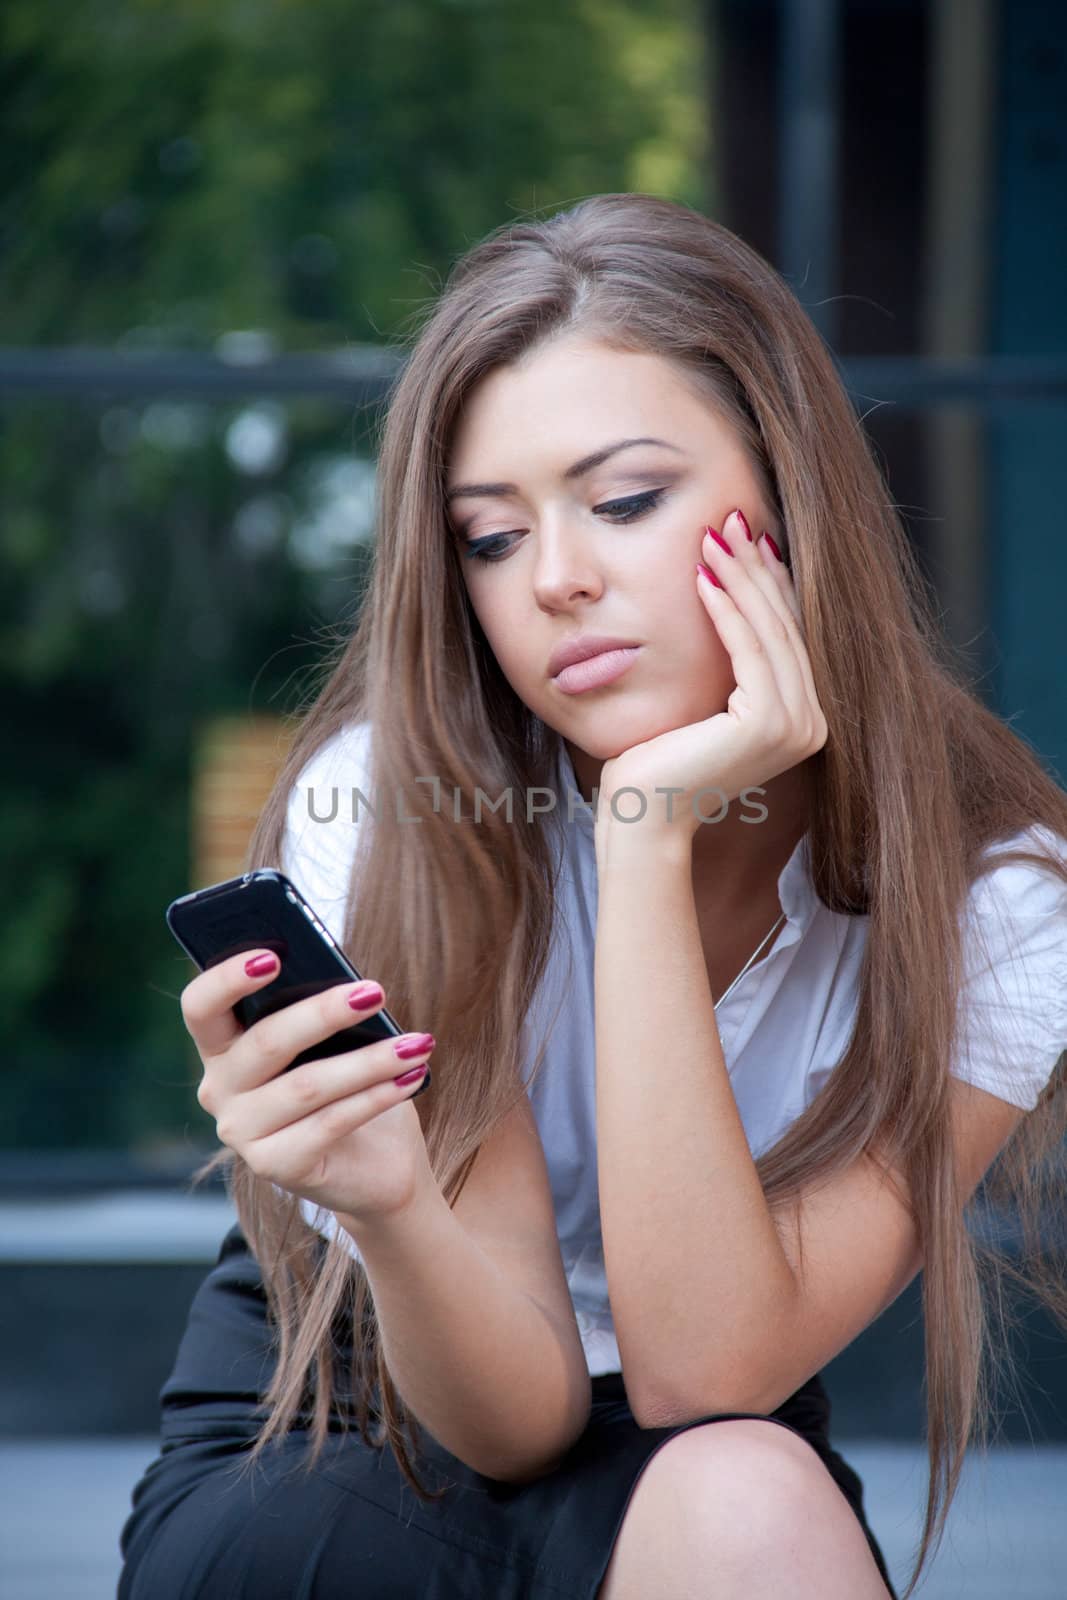 young woman looks in phone having seen something by vitmihailov